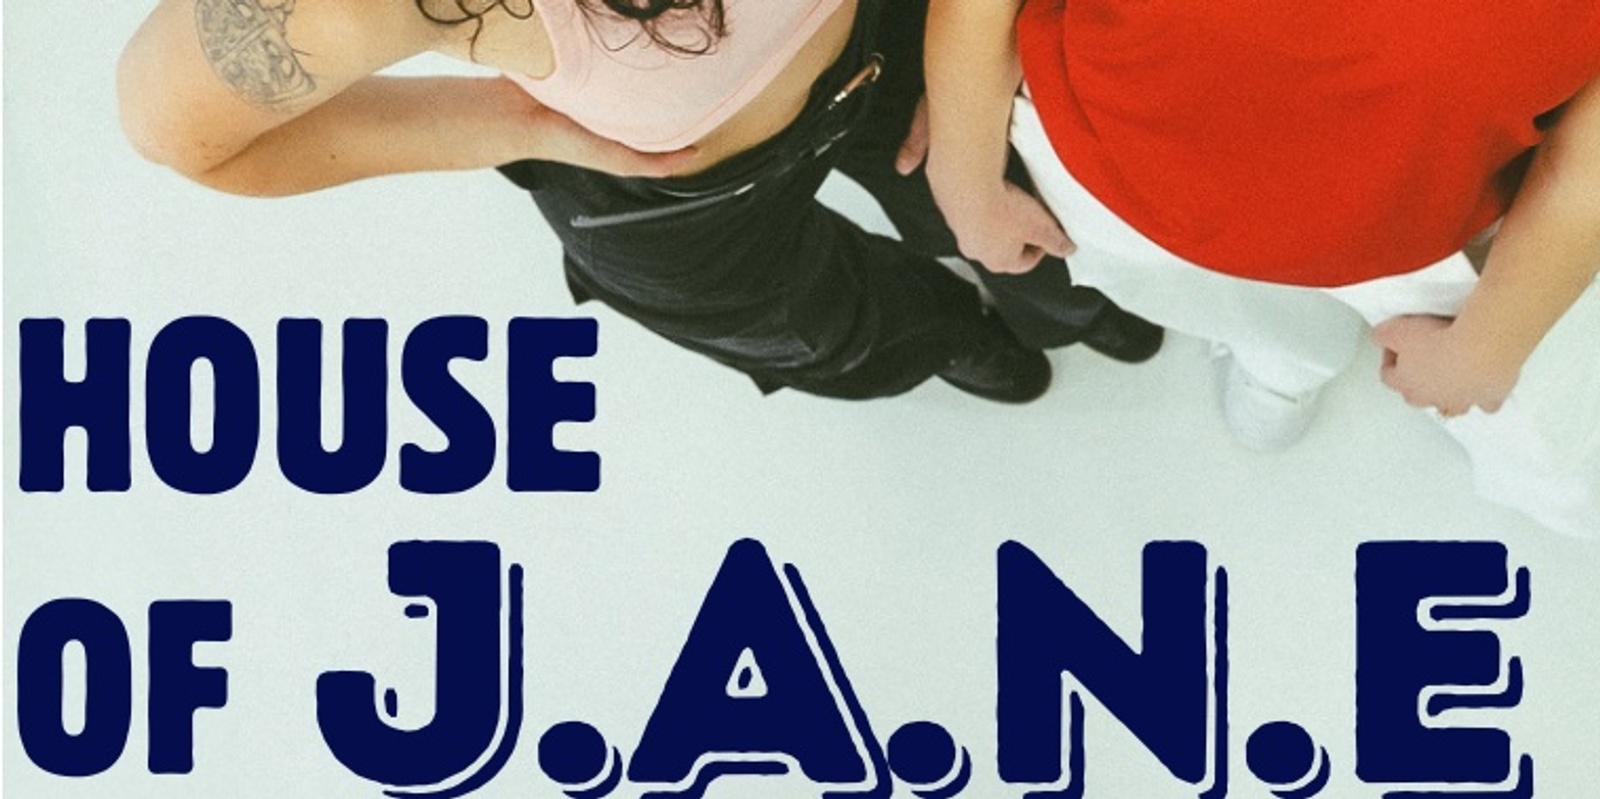 Banner image for July's Crew Night Out - House of J.A.N.E. DJ night